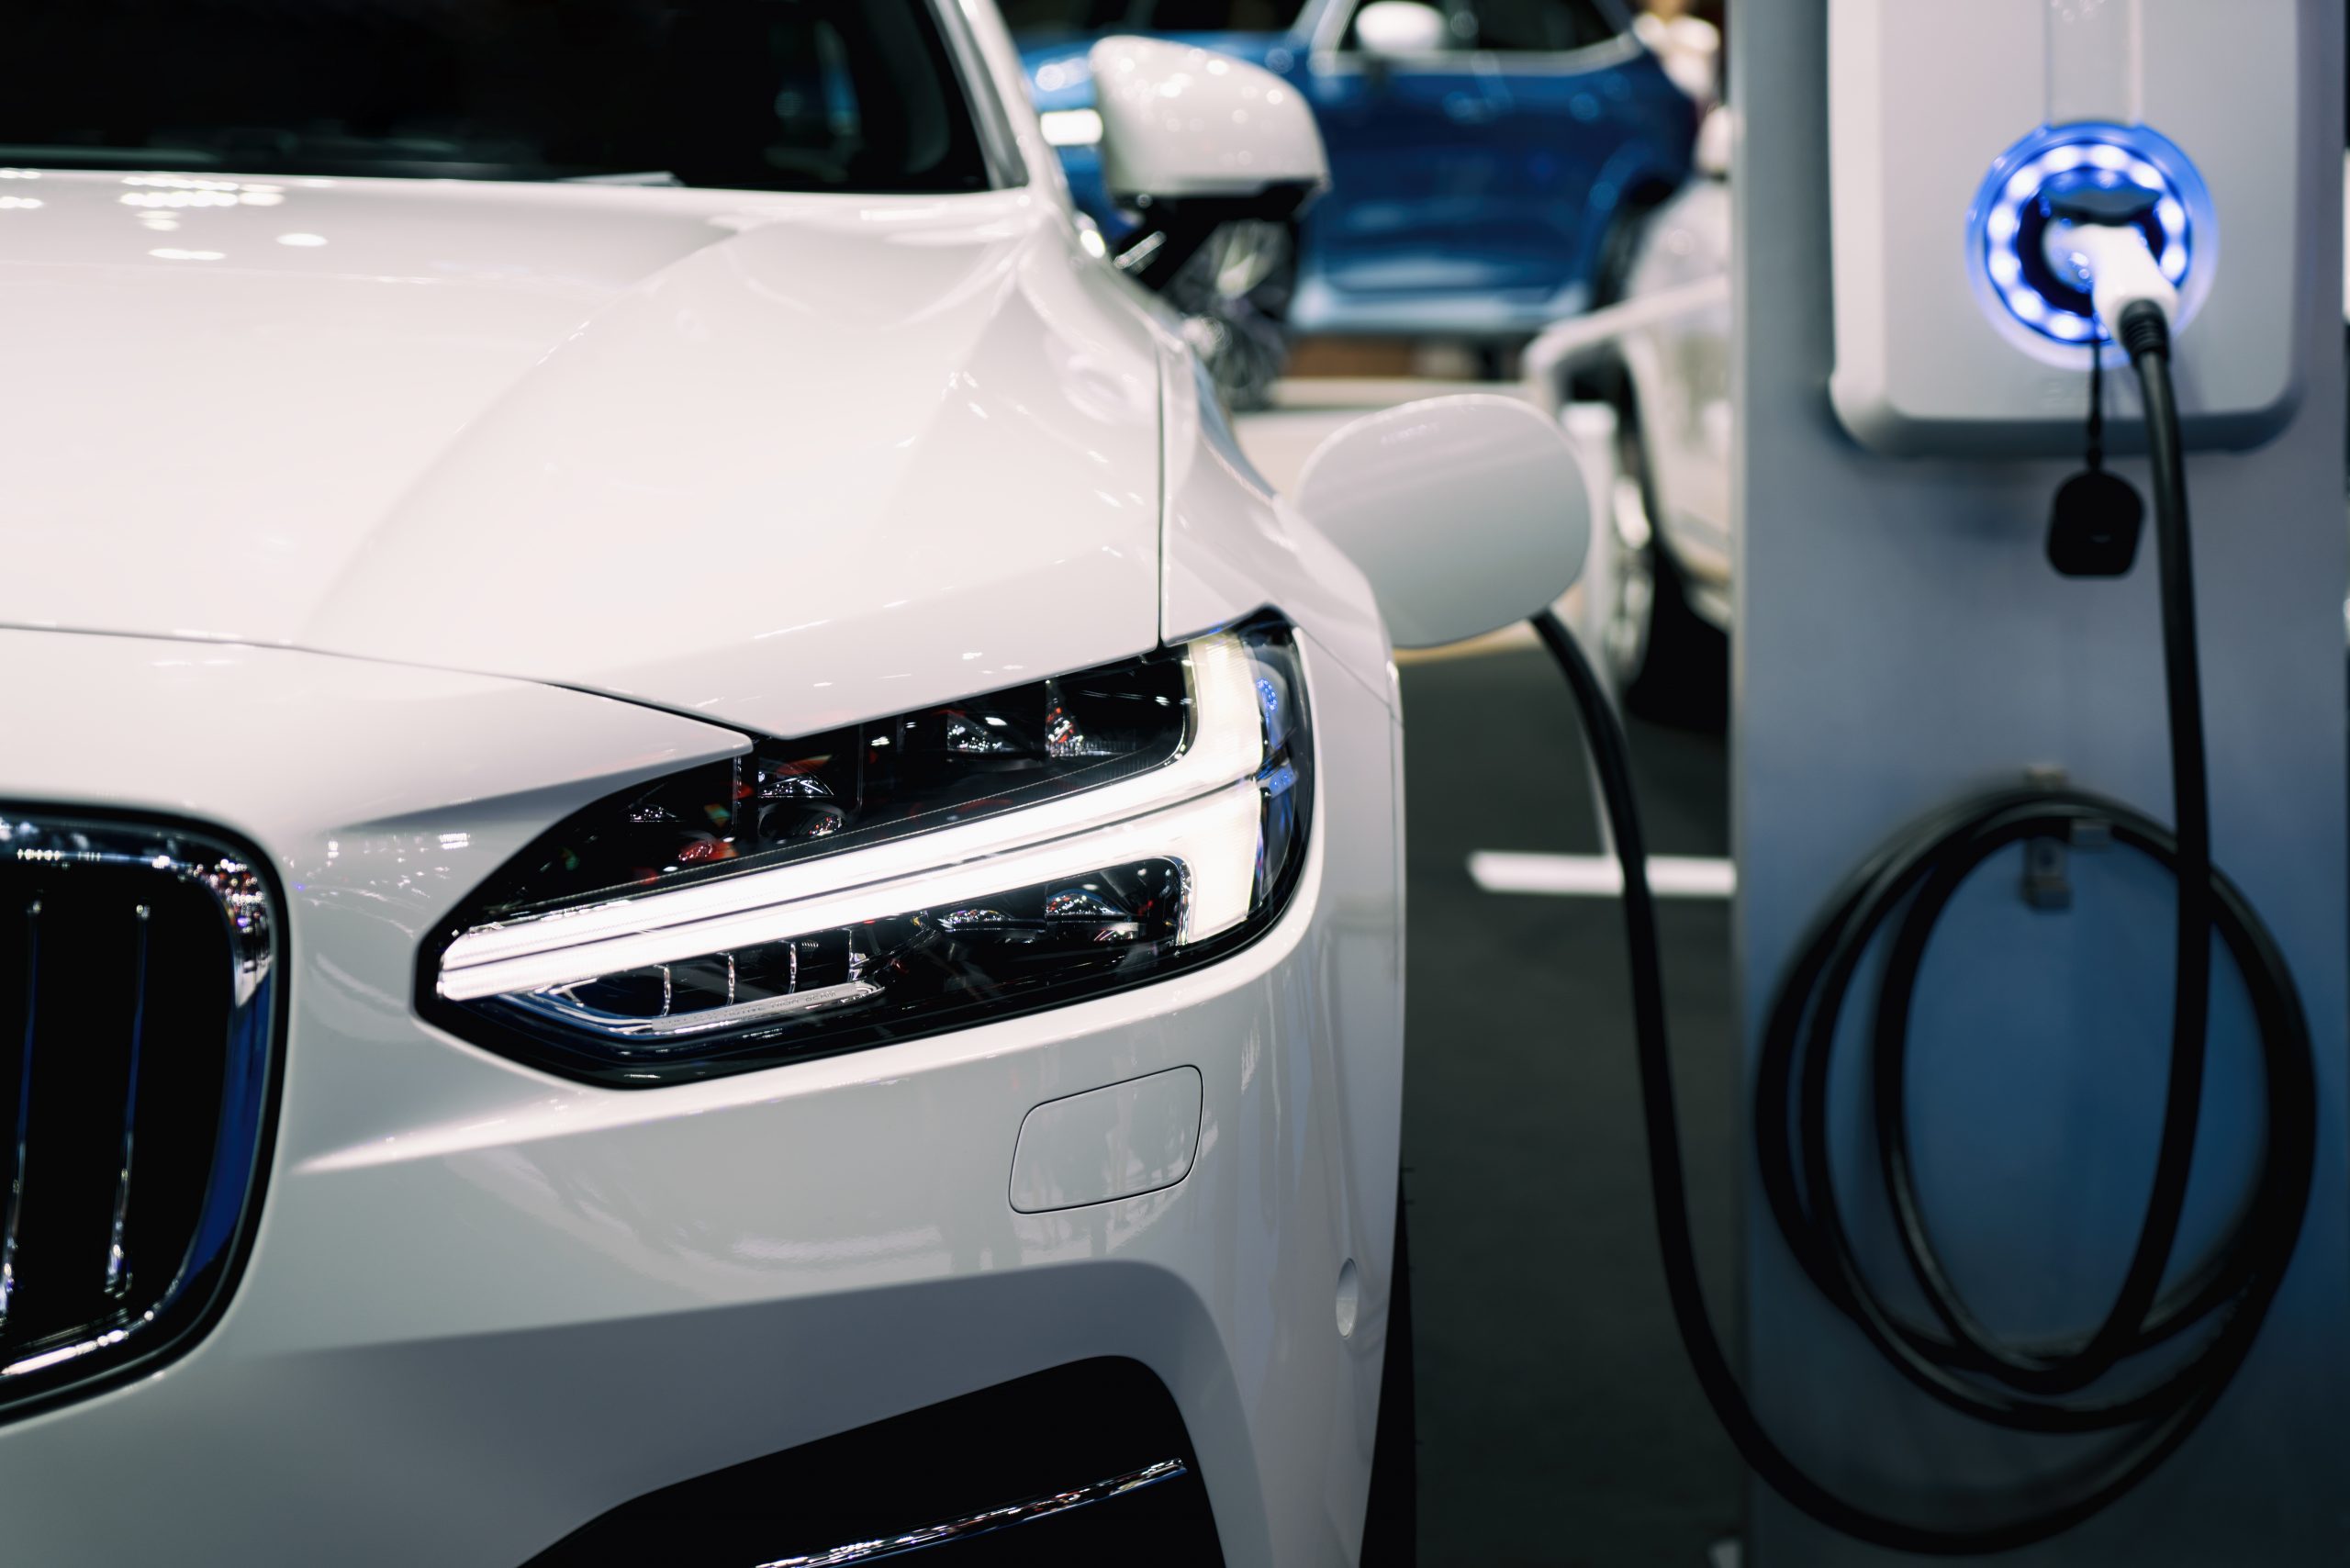 Know everything about charging electric vehicle